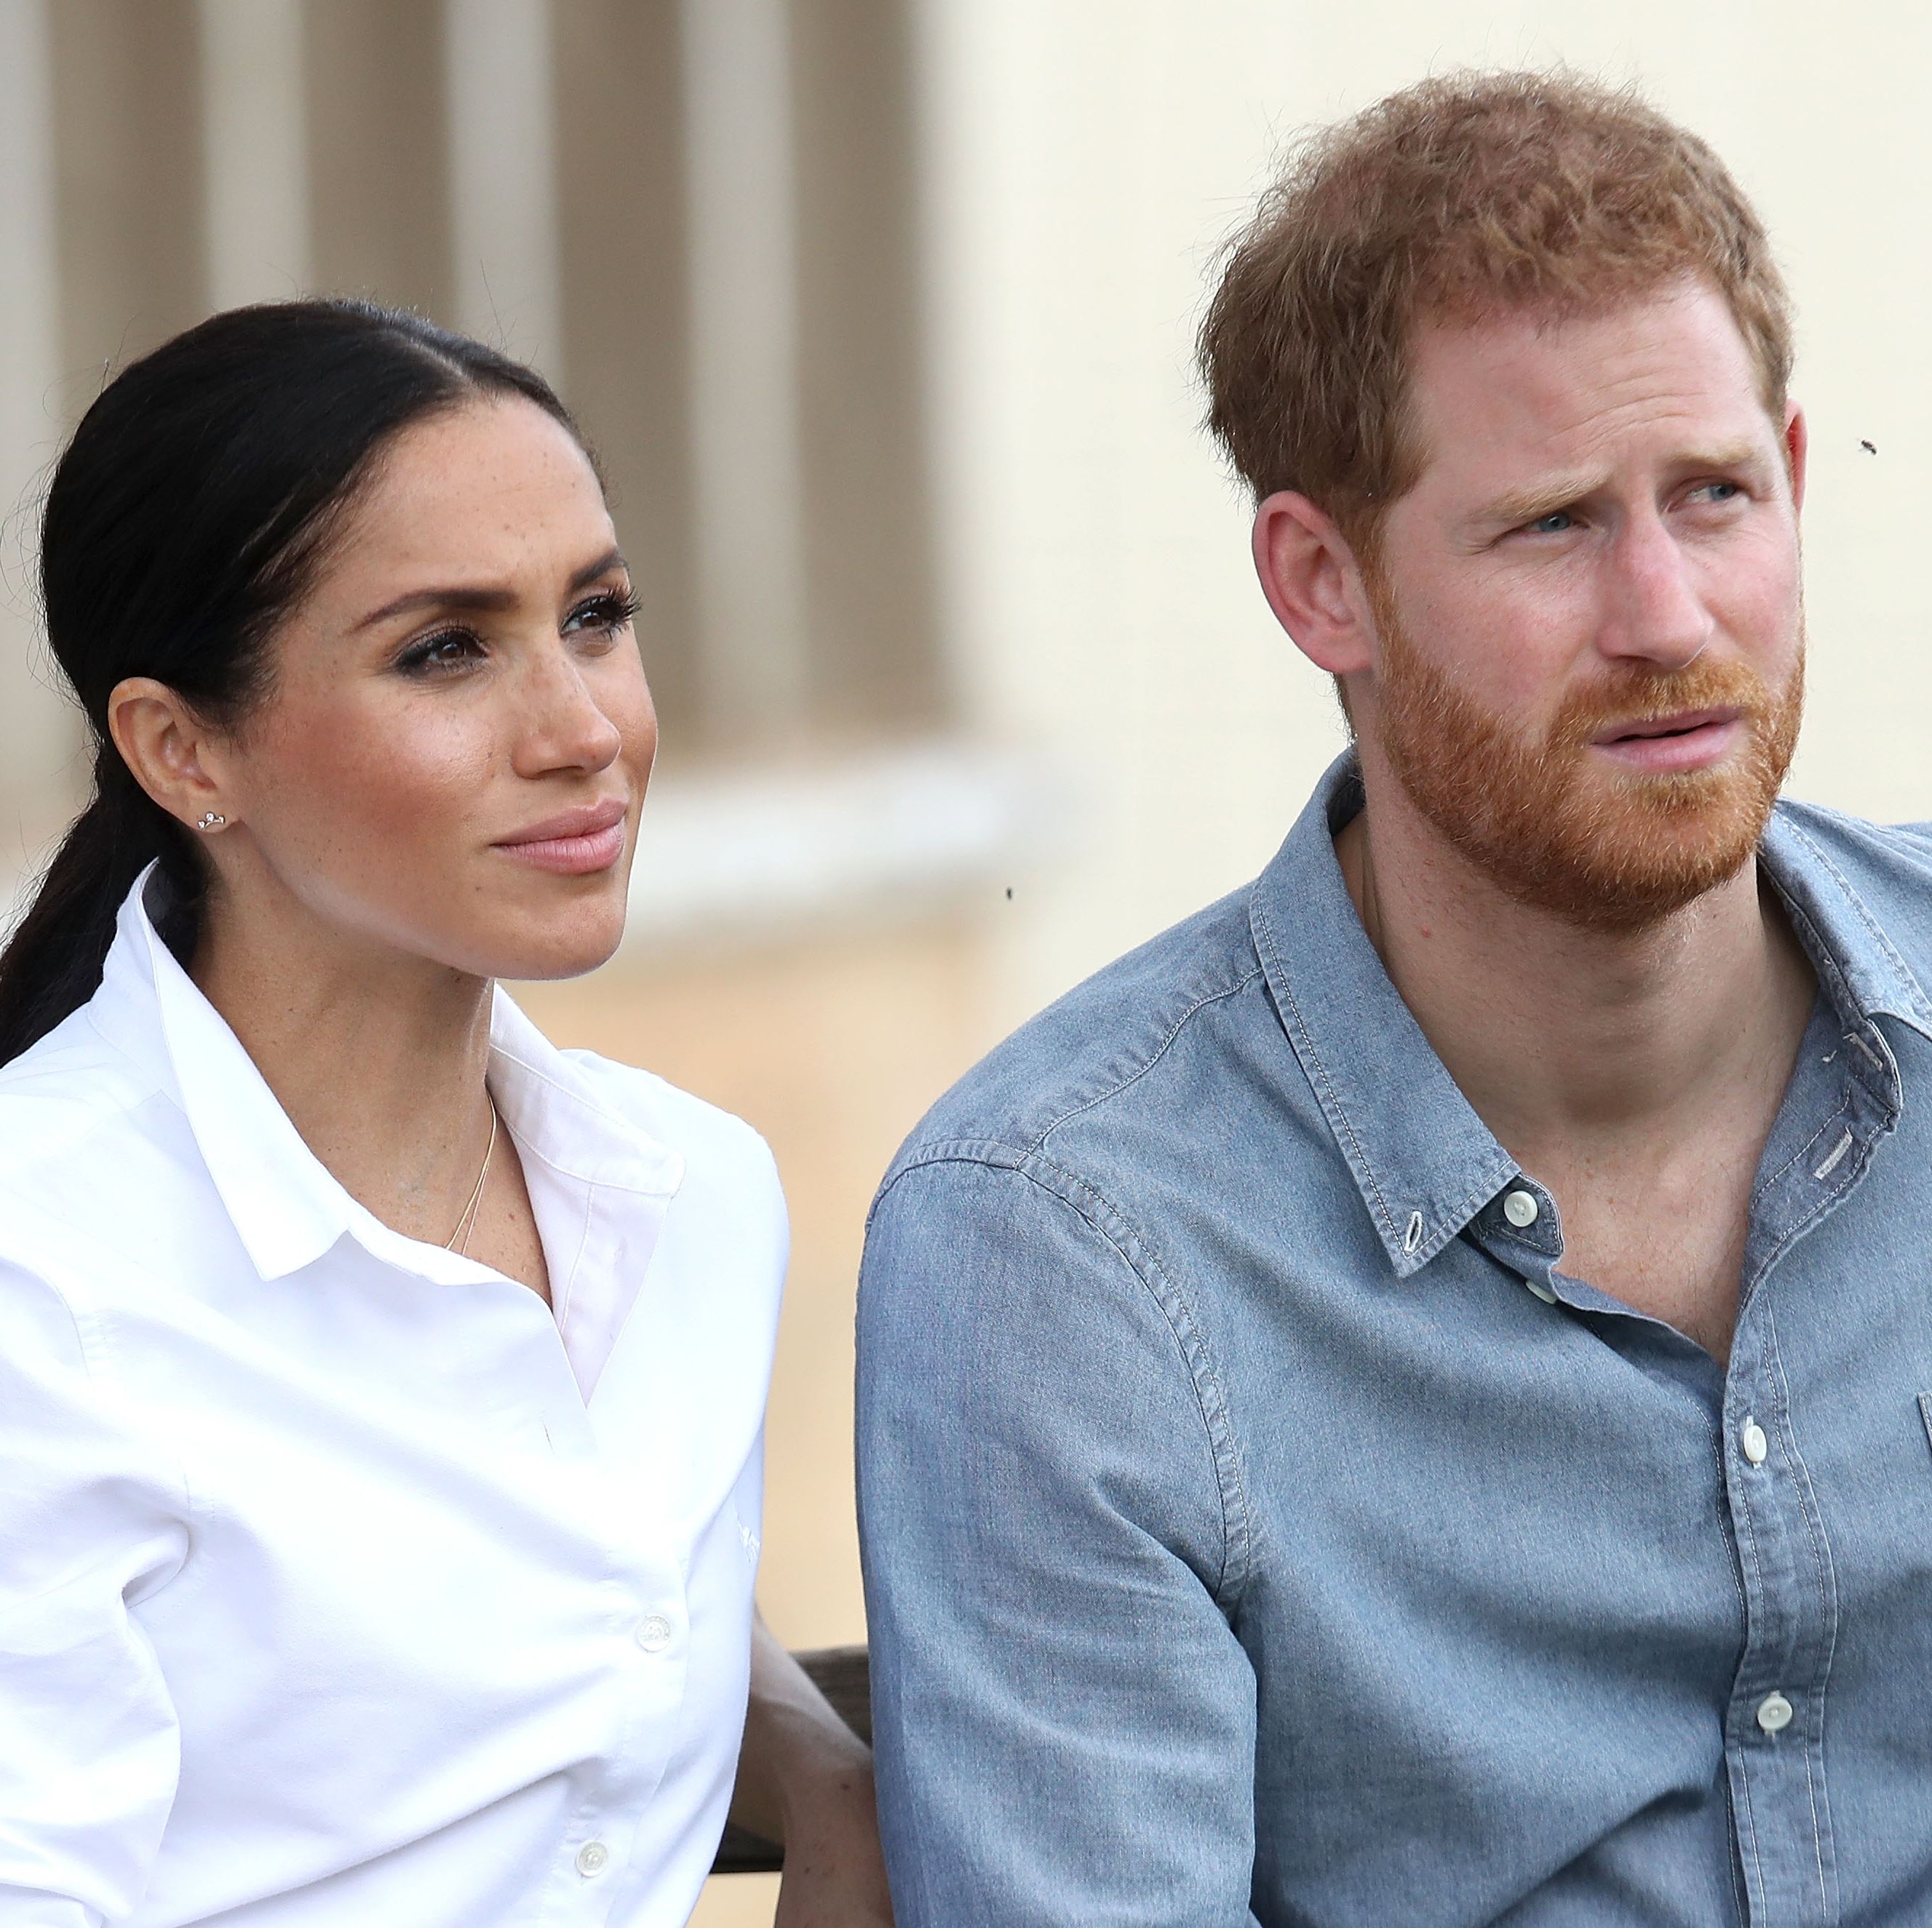 One of the Queen's Top Aides Apparently Predicted Harry and Meghan's Marriage Would 